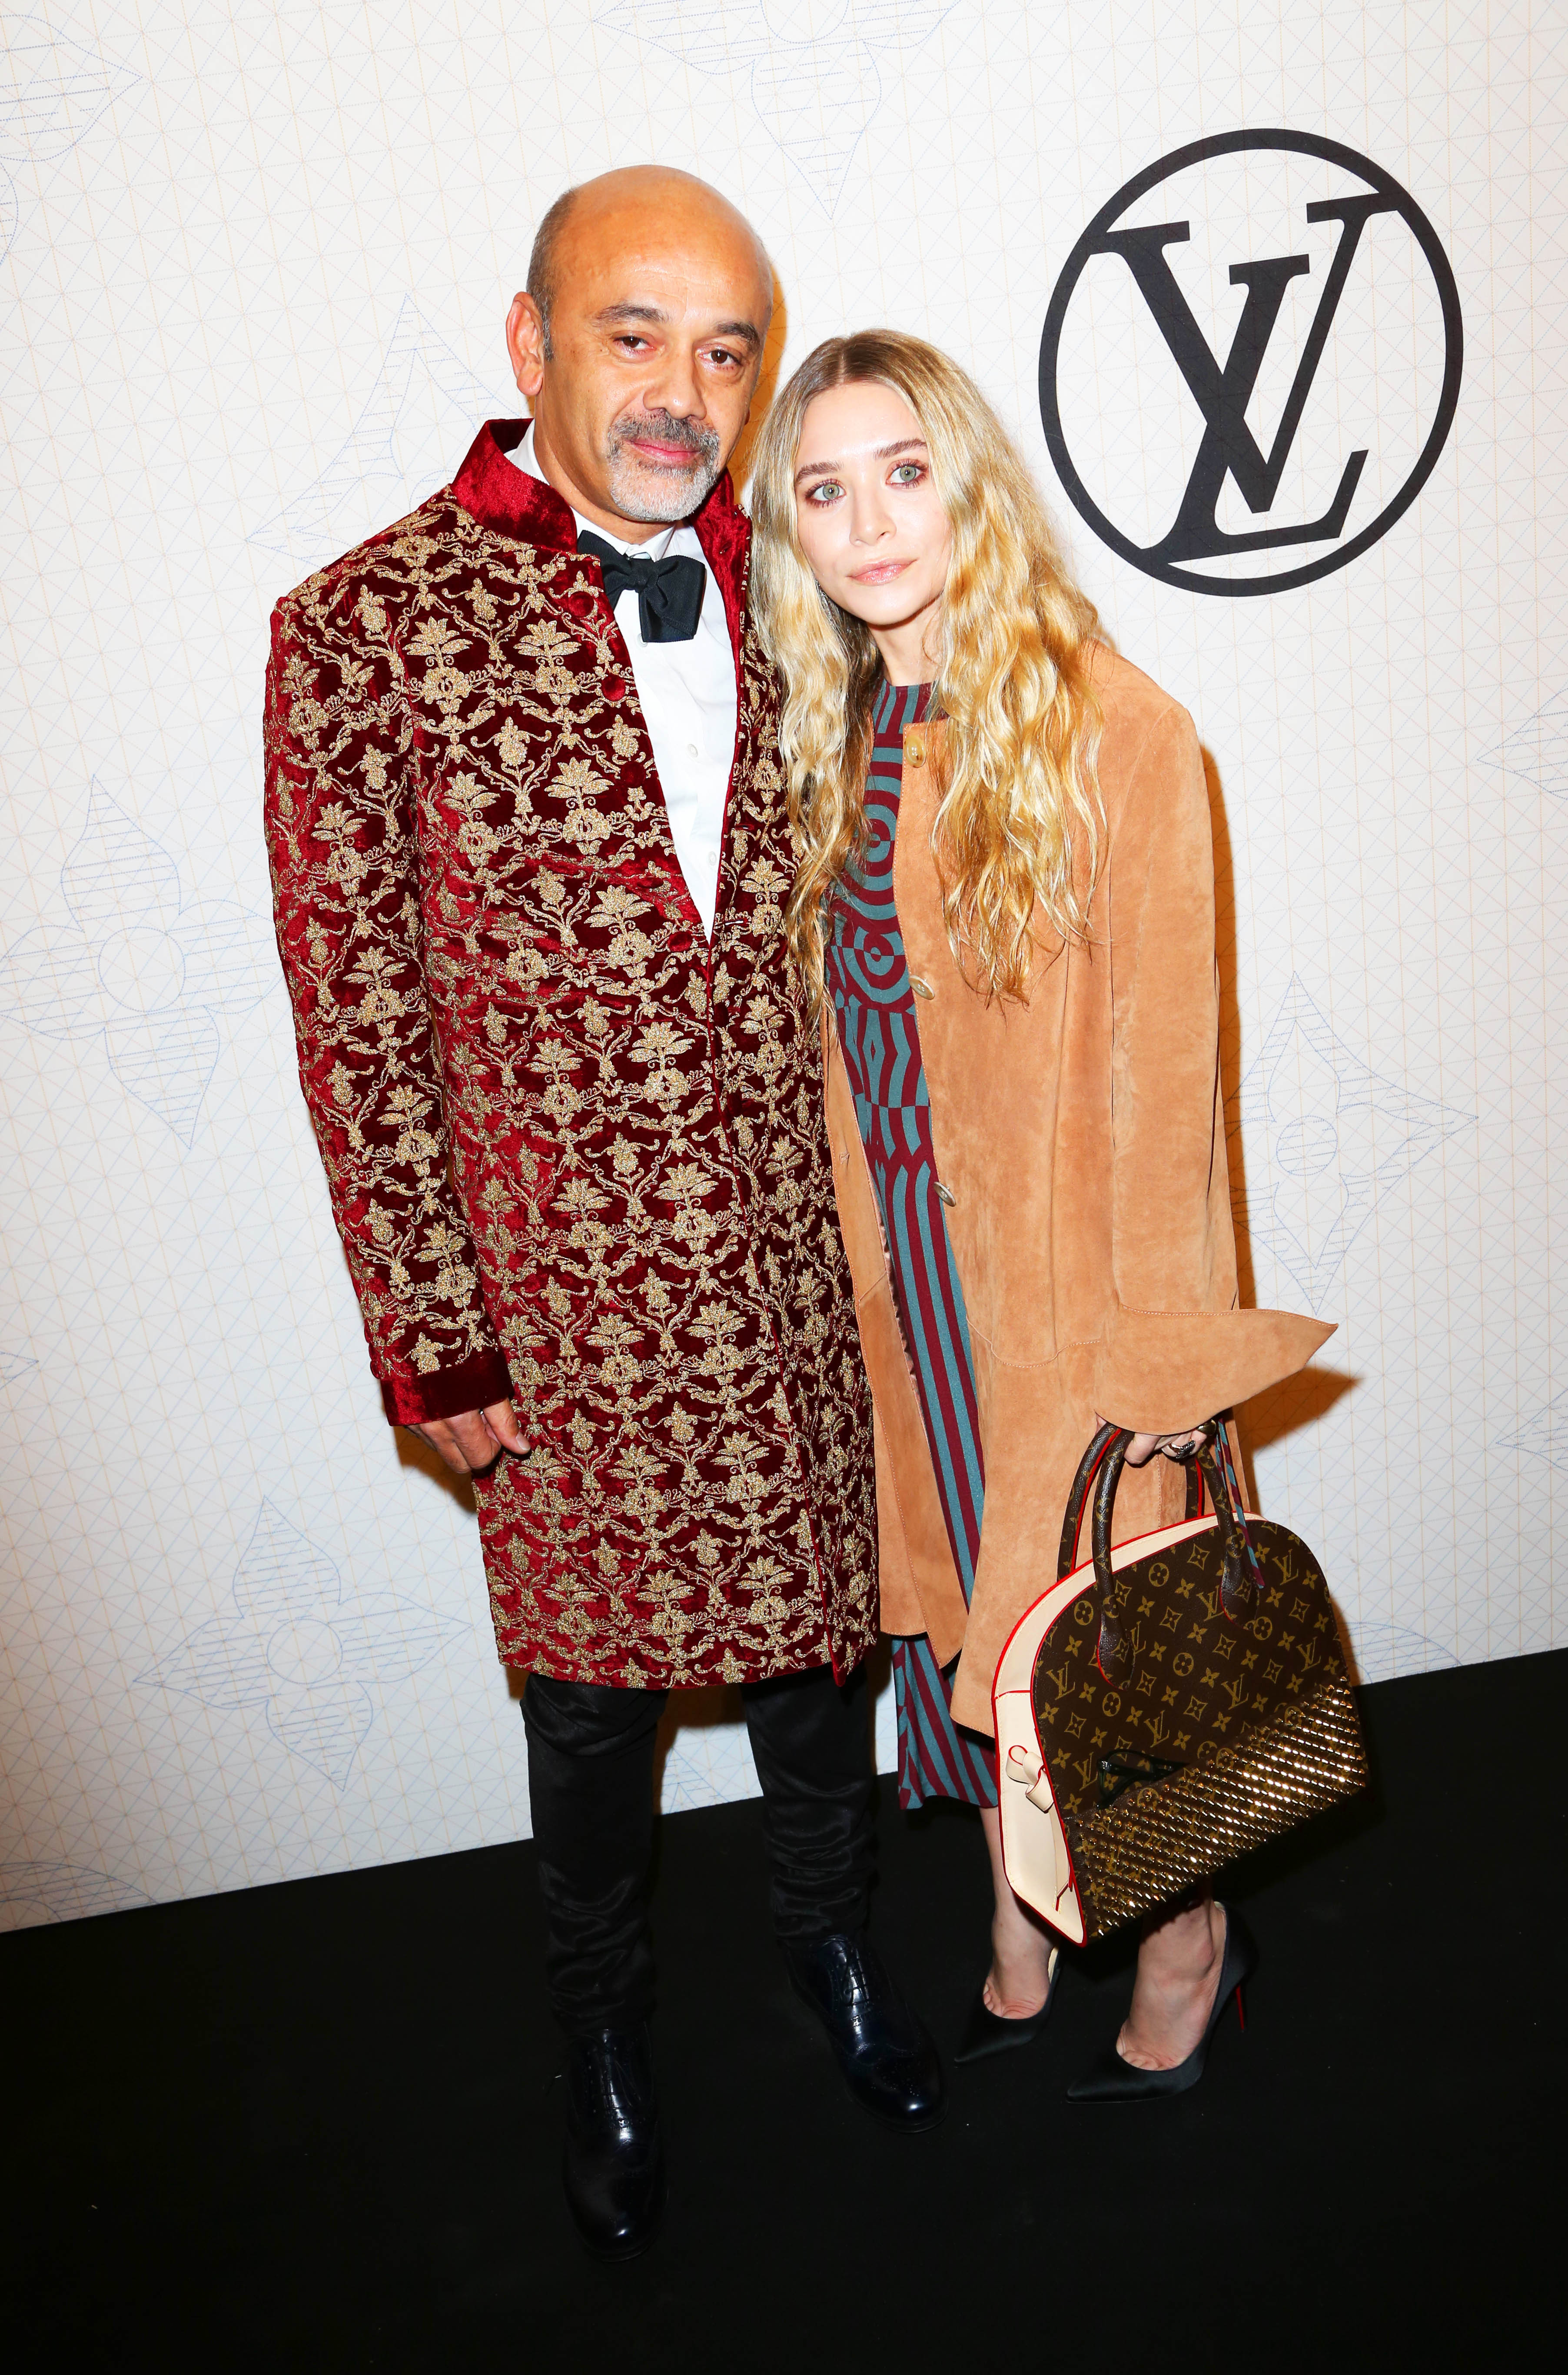 Louis Vuitton on X: Chloë Sevigny and Adèle Exarchopoulos wearing # LouisVuitton at the #LVSeries1 event in Shanghai.  /  X